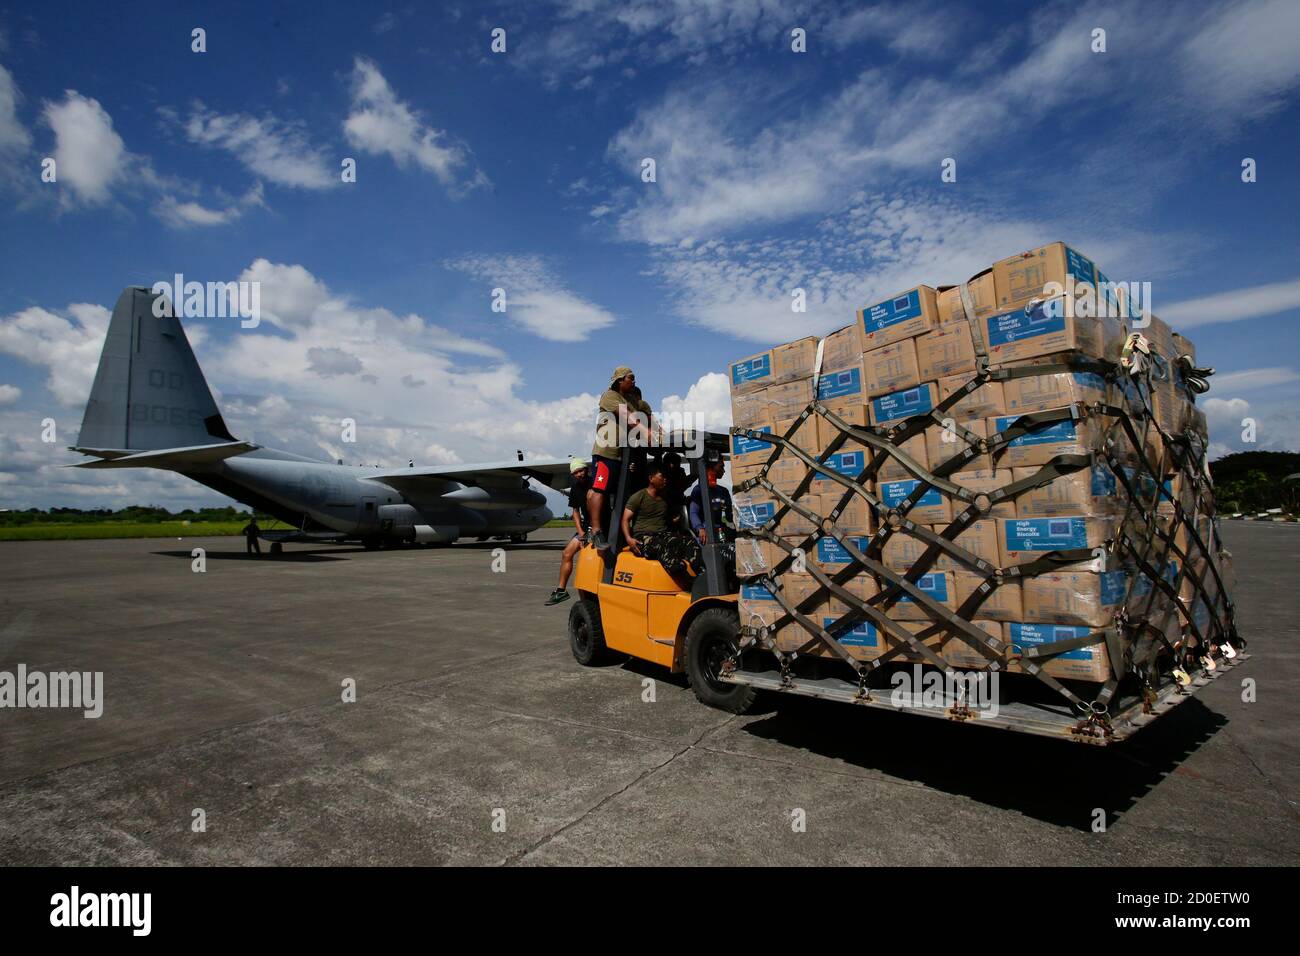 Philippine Army personnel unload relief goods to be transported to regions affected by Typhoon Bopha, from the Marine Corps KC-130J Hercules aircraft inside the International Airport in Davao, Mindanao December 15, 2012. United States Marines together with the Philippine Armed forces and various non-profit organisations continue to work hand in hand to provide humanitarian assistance and disaster relief support  at the request of the Philippines government, in the wake of Typhoon  Bopha, which made landfall on December 4, 2012, according to a press release. REUTERS/John Javellana (PHILIPPINES  Stock Photo